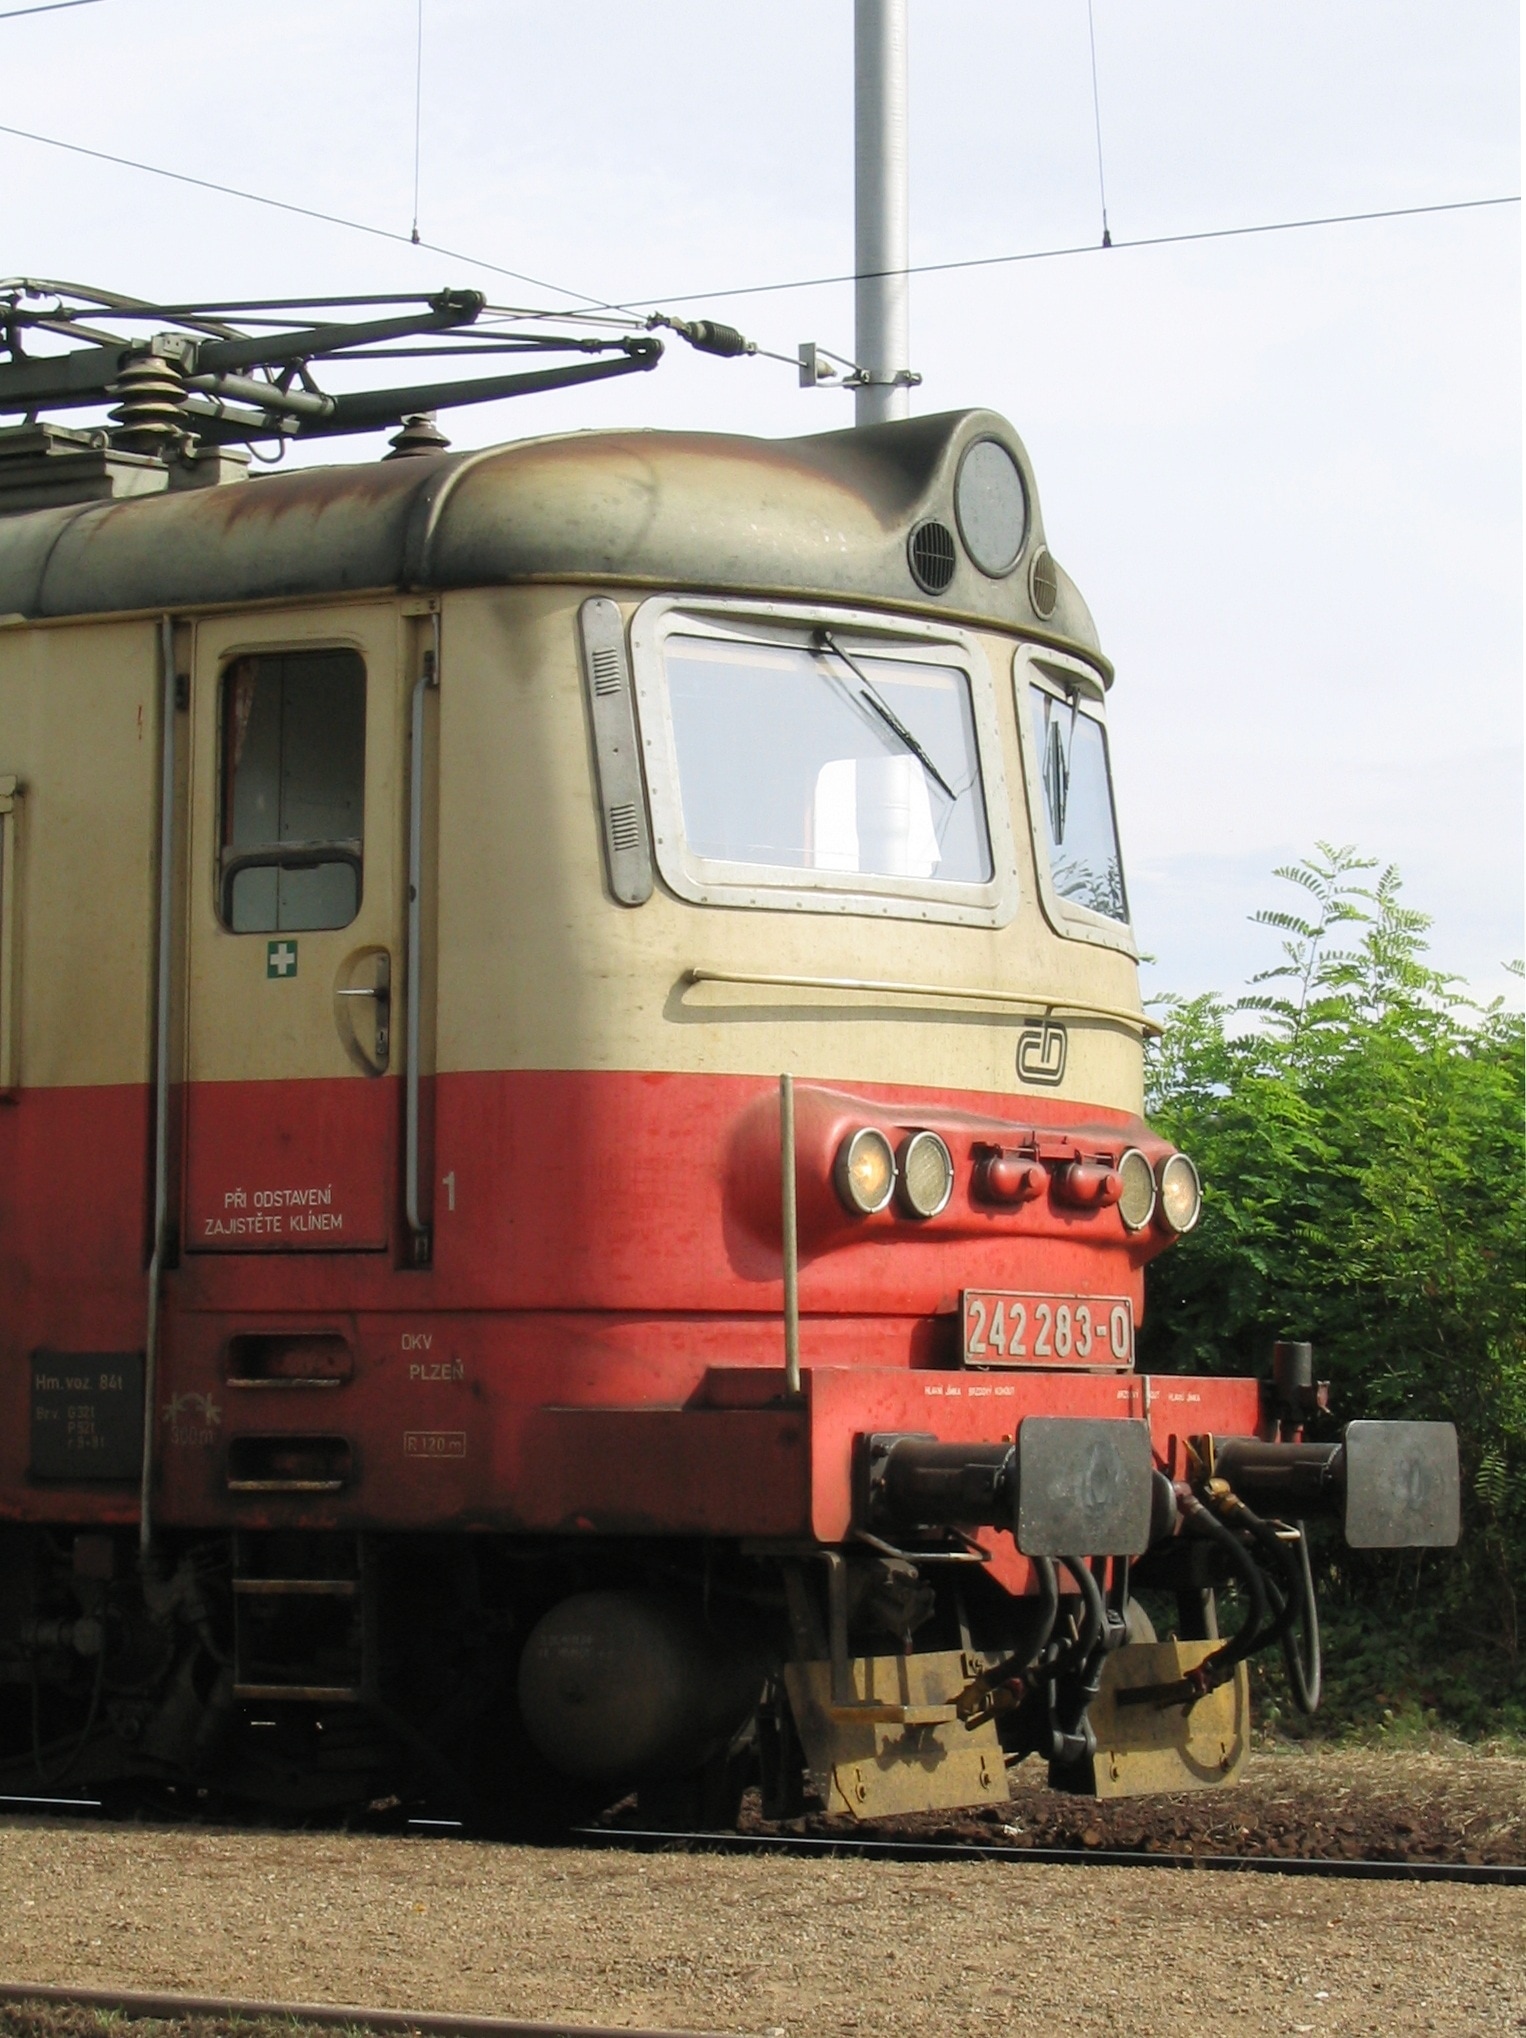 photography of red and beige train with #242 283-0 plate